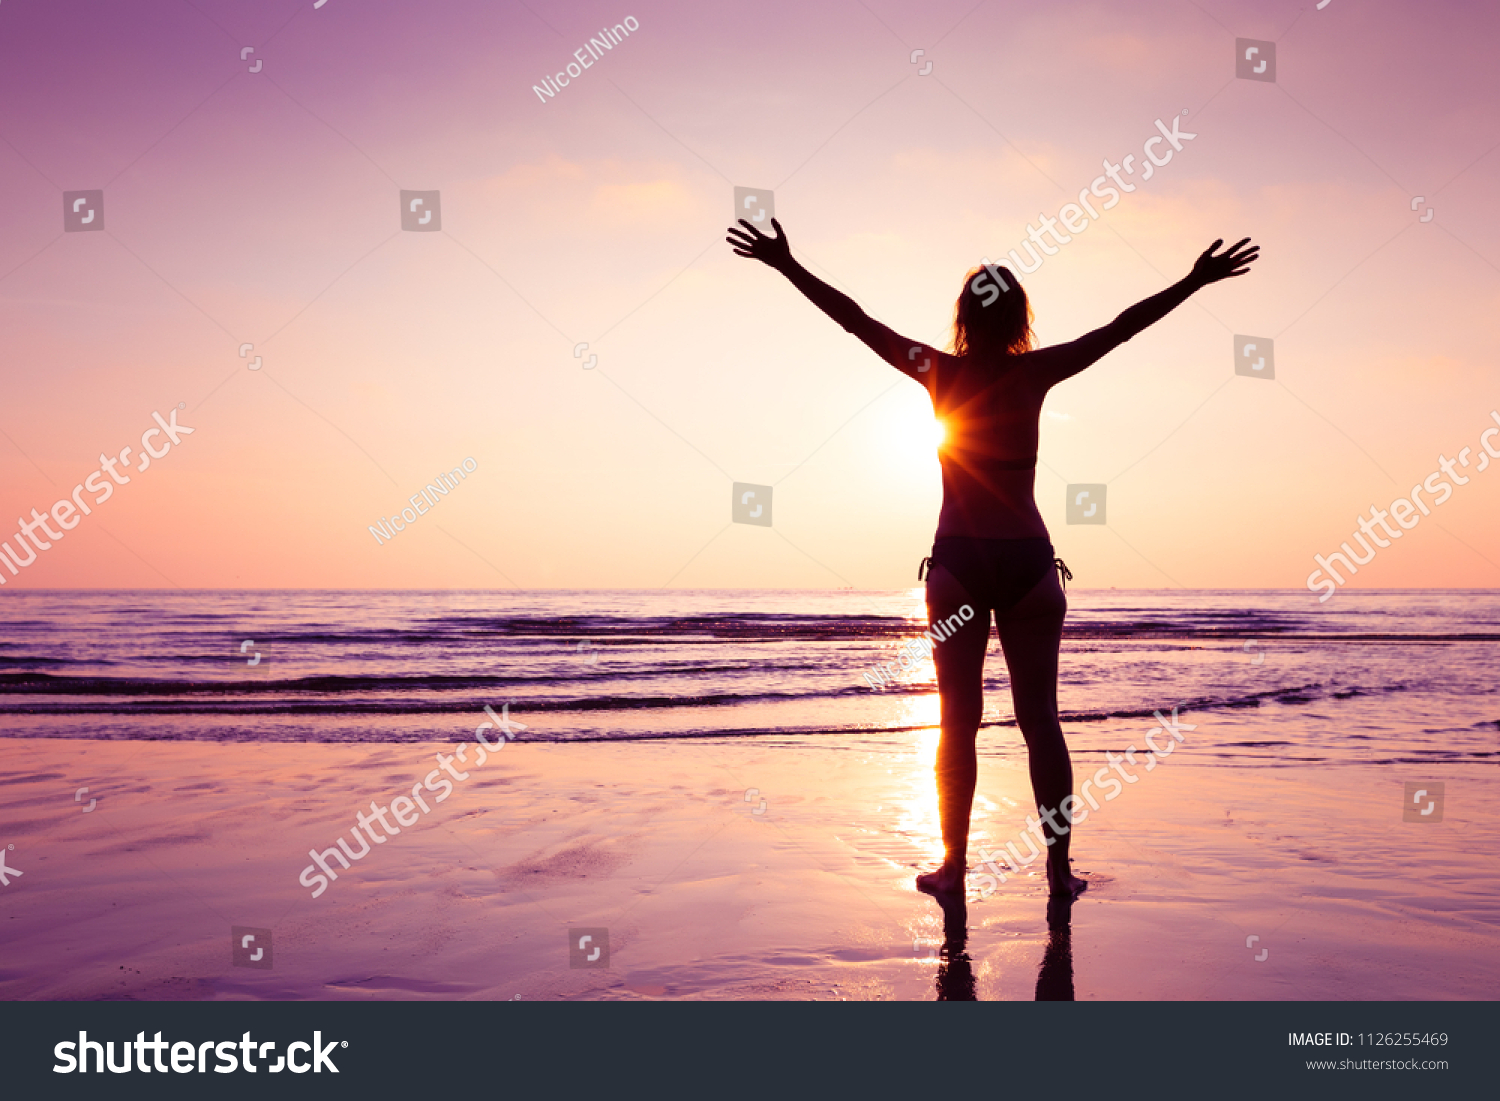 Happy joyful woman spreading hands on the beach at sunset, cheerful emotion and mindfulness, balance, mindful thinking #1126255469